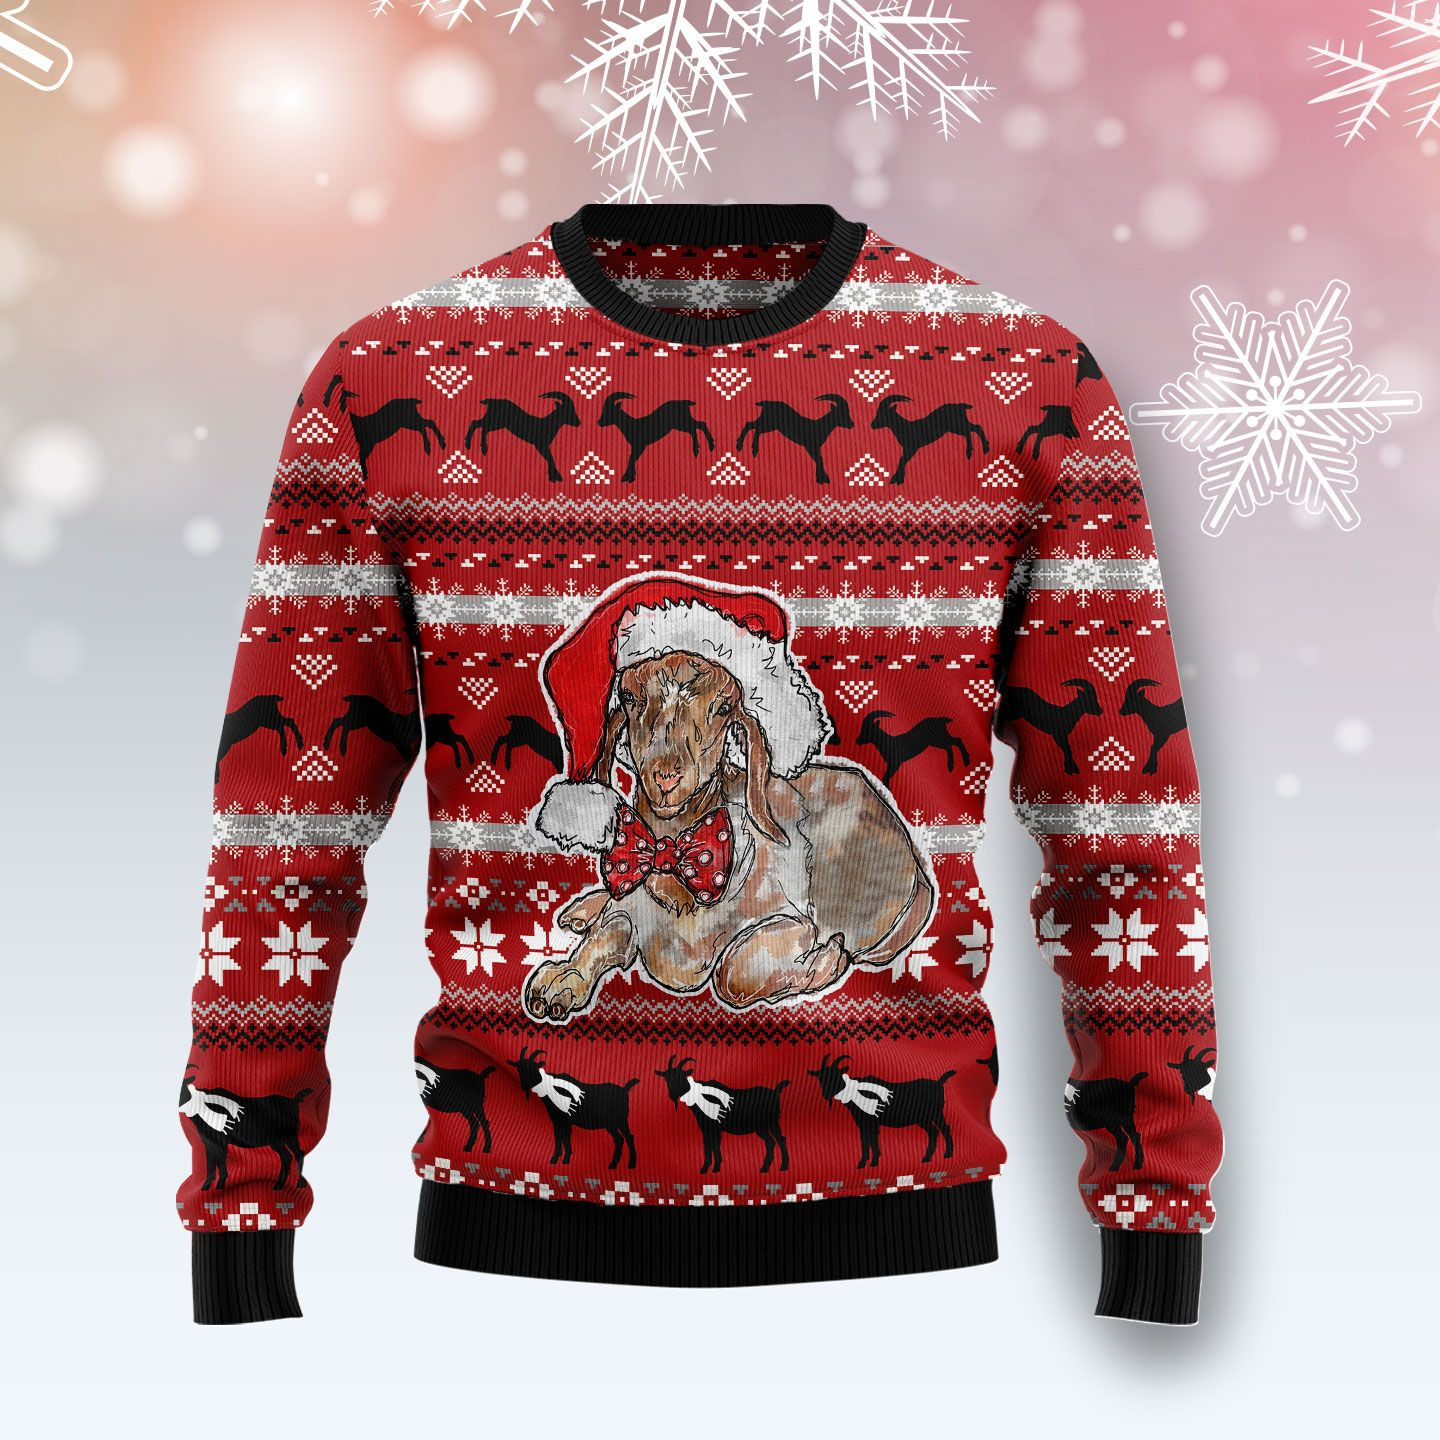 Santa Goat Ugly Christmas Sweater Ugly Sweater For Men Women